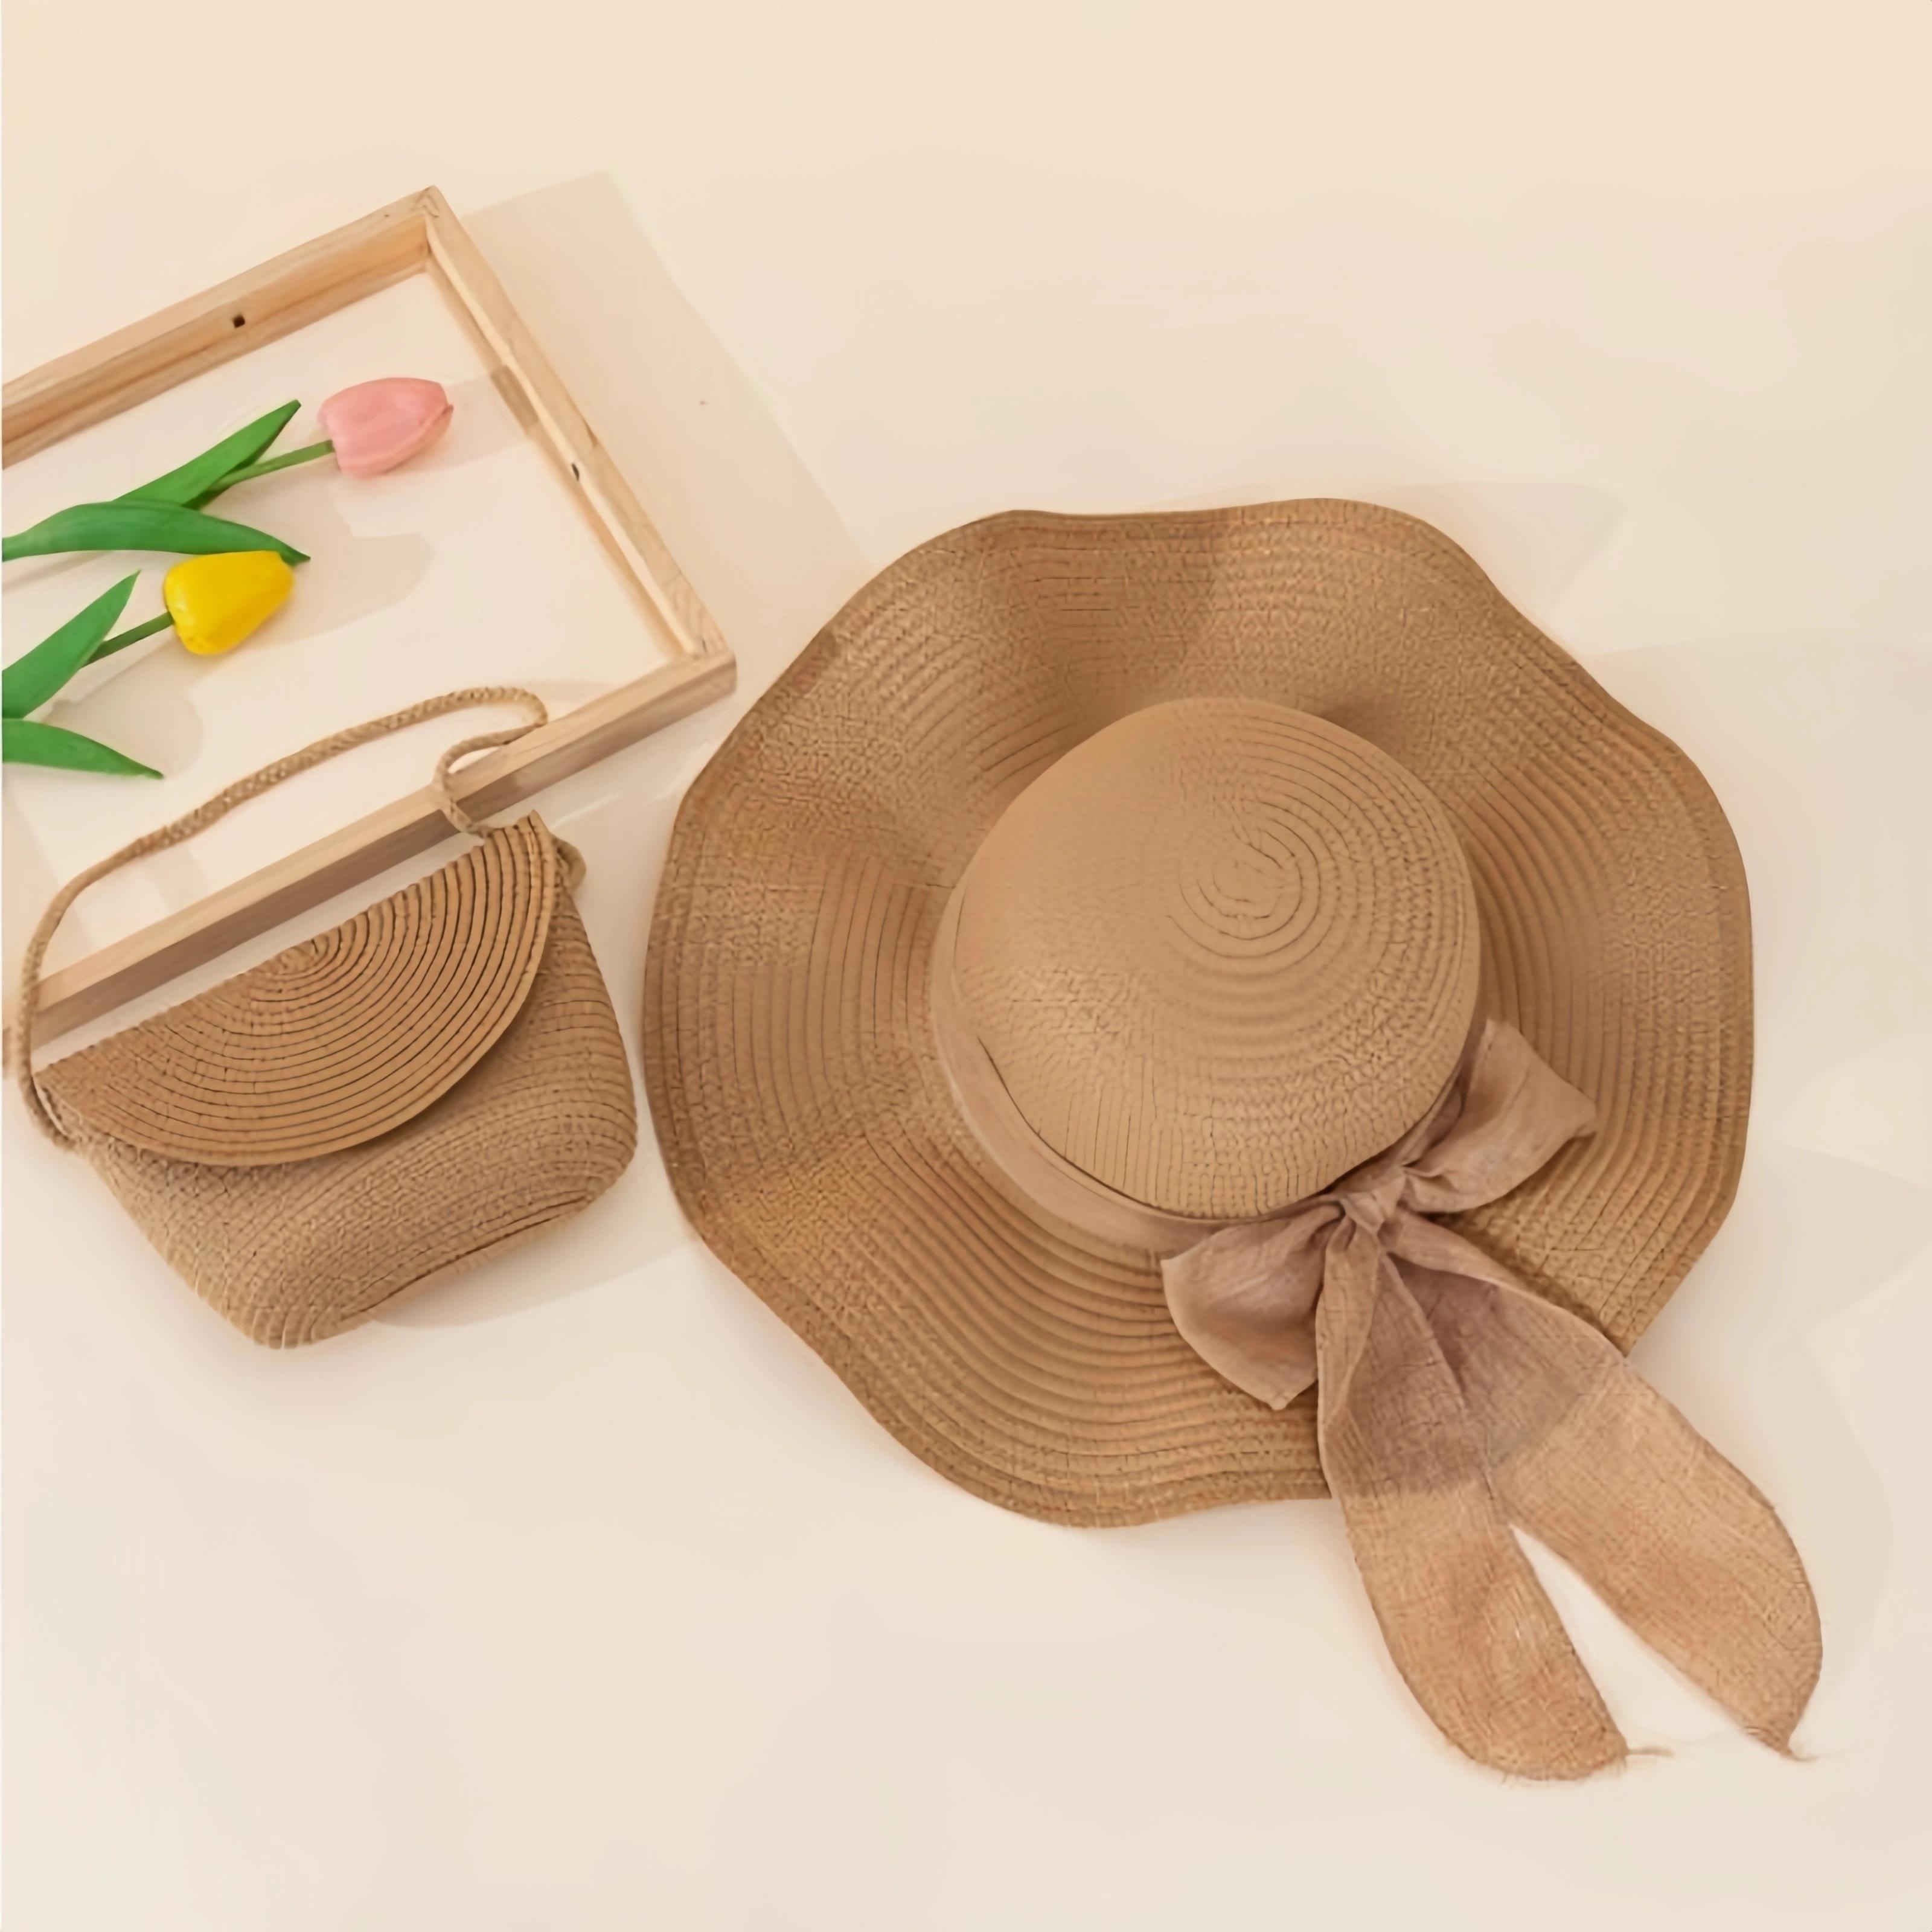 

2pcs/set Straw Sun Hat & Coordinating Woven Shoulder Bag Beach Sun Hat - For Daily Outings Seaside Beach Travel